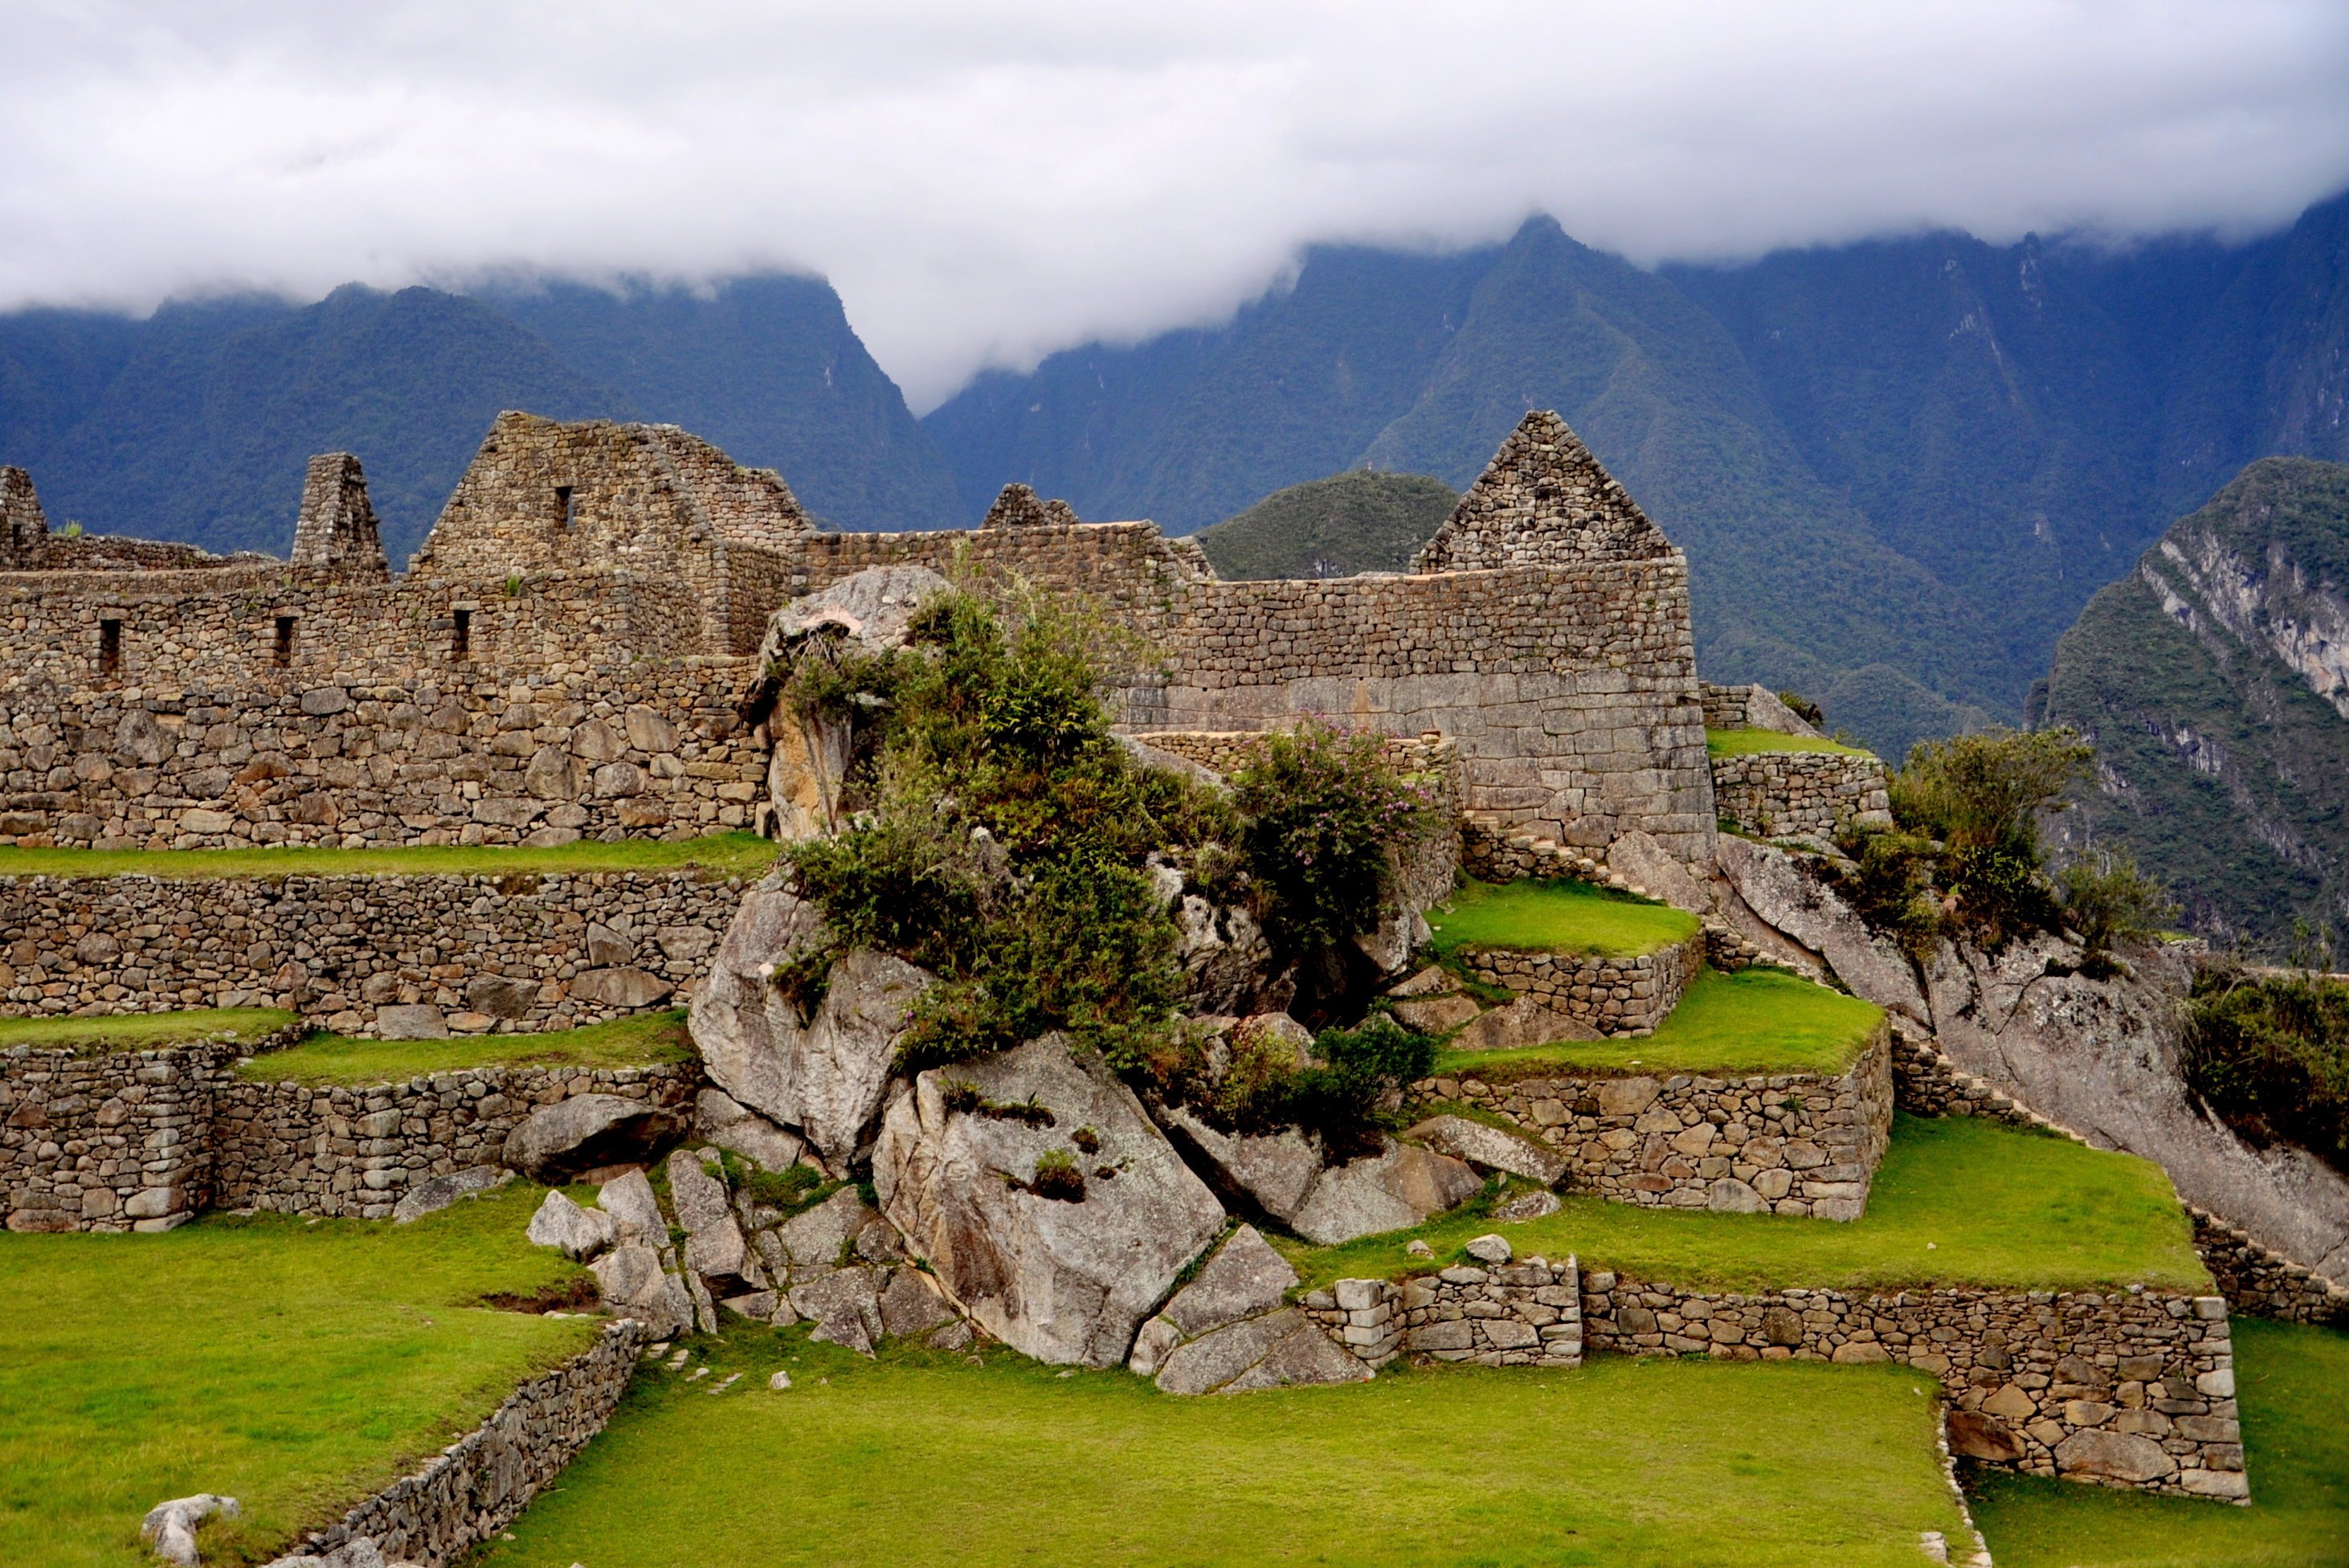 machu picchu is part of what ancient civilization and where is it?